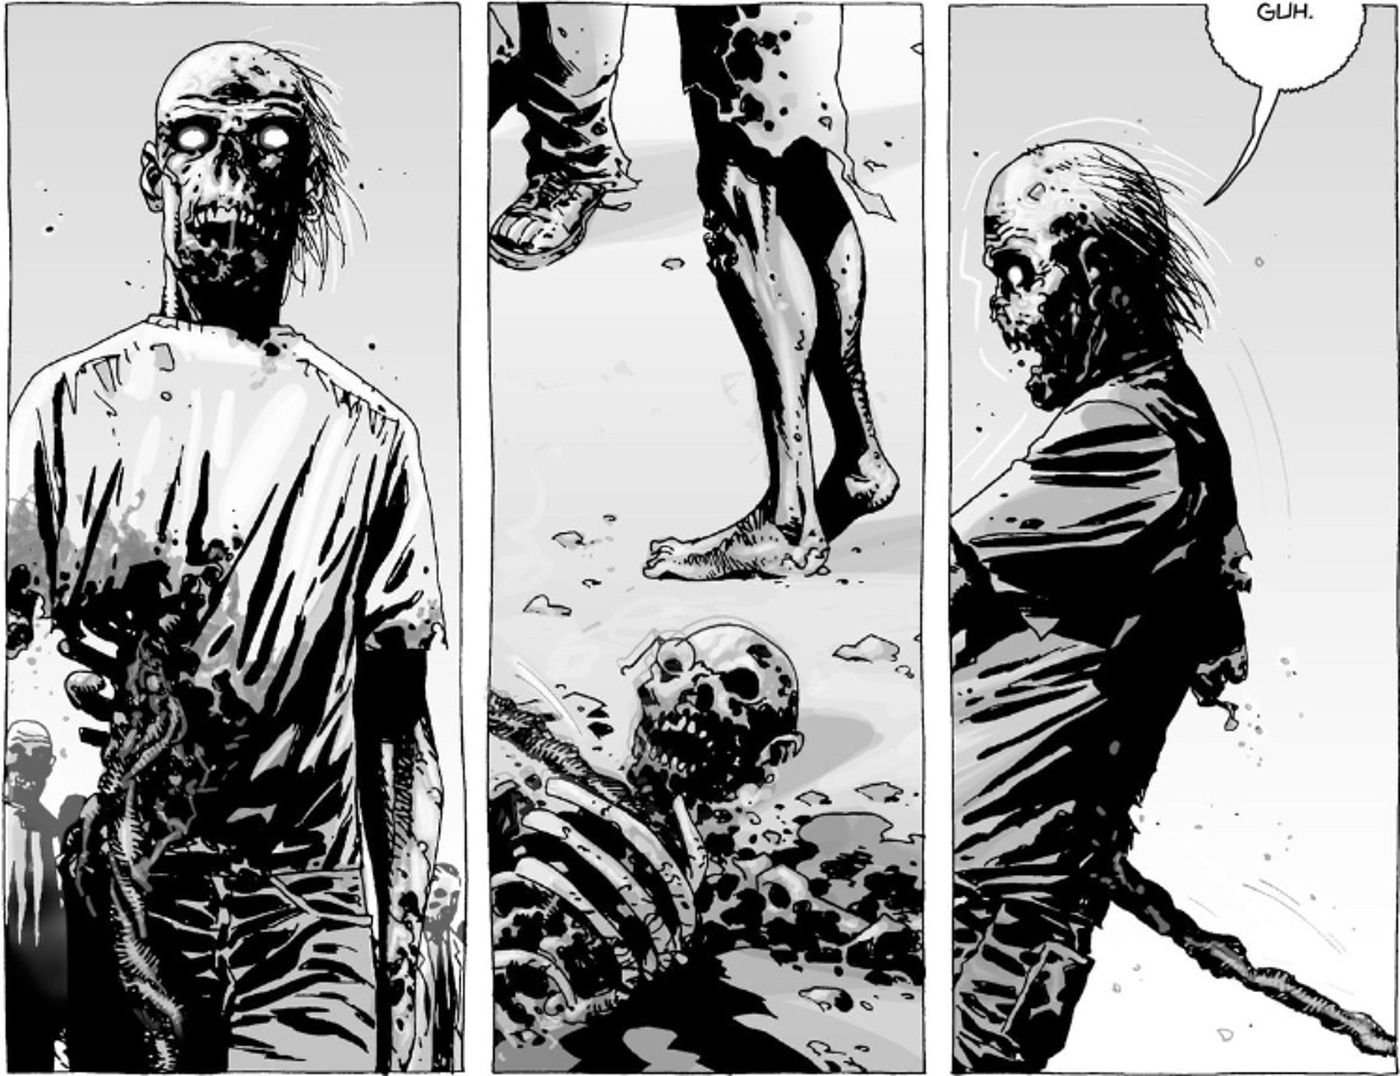 The Walking Dead, zombies walk over the skeletons of other zombies that have been dispatched